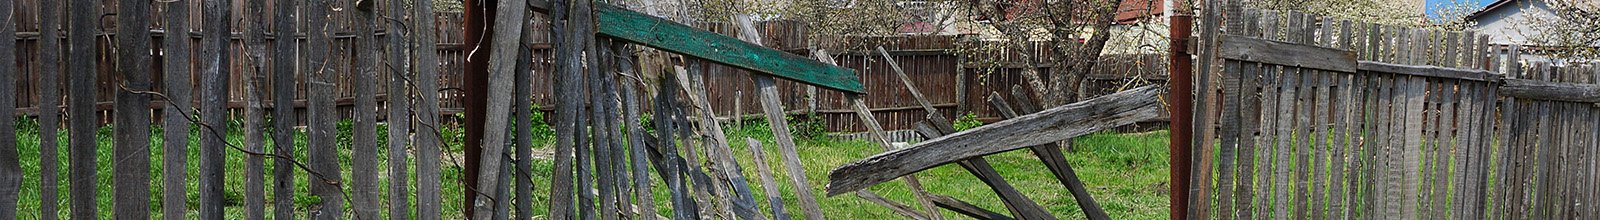 Photo of old, broken down fence